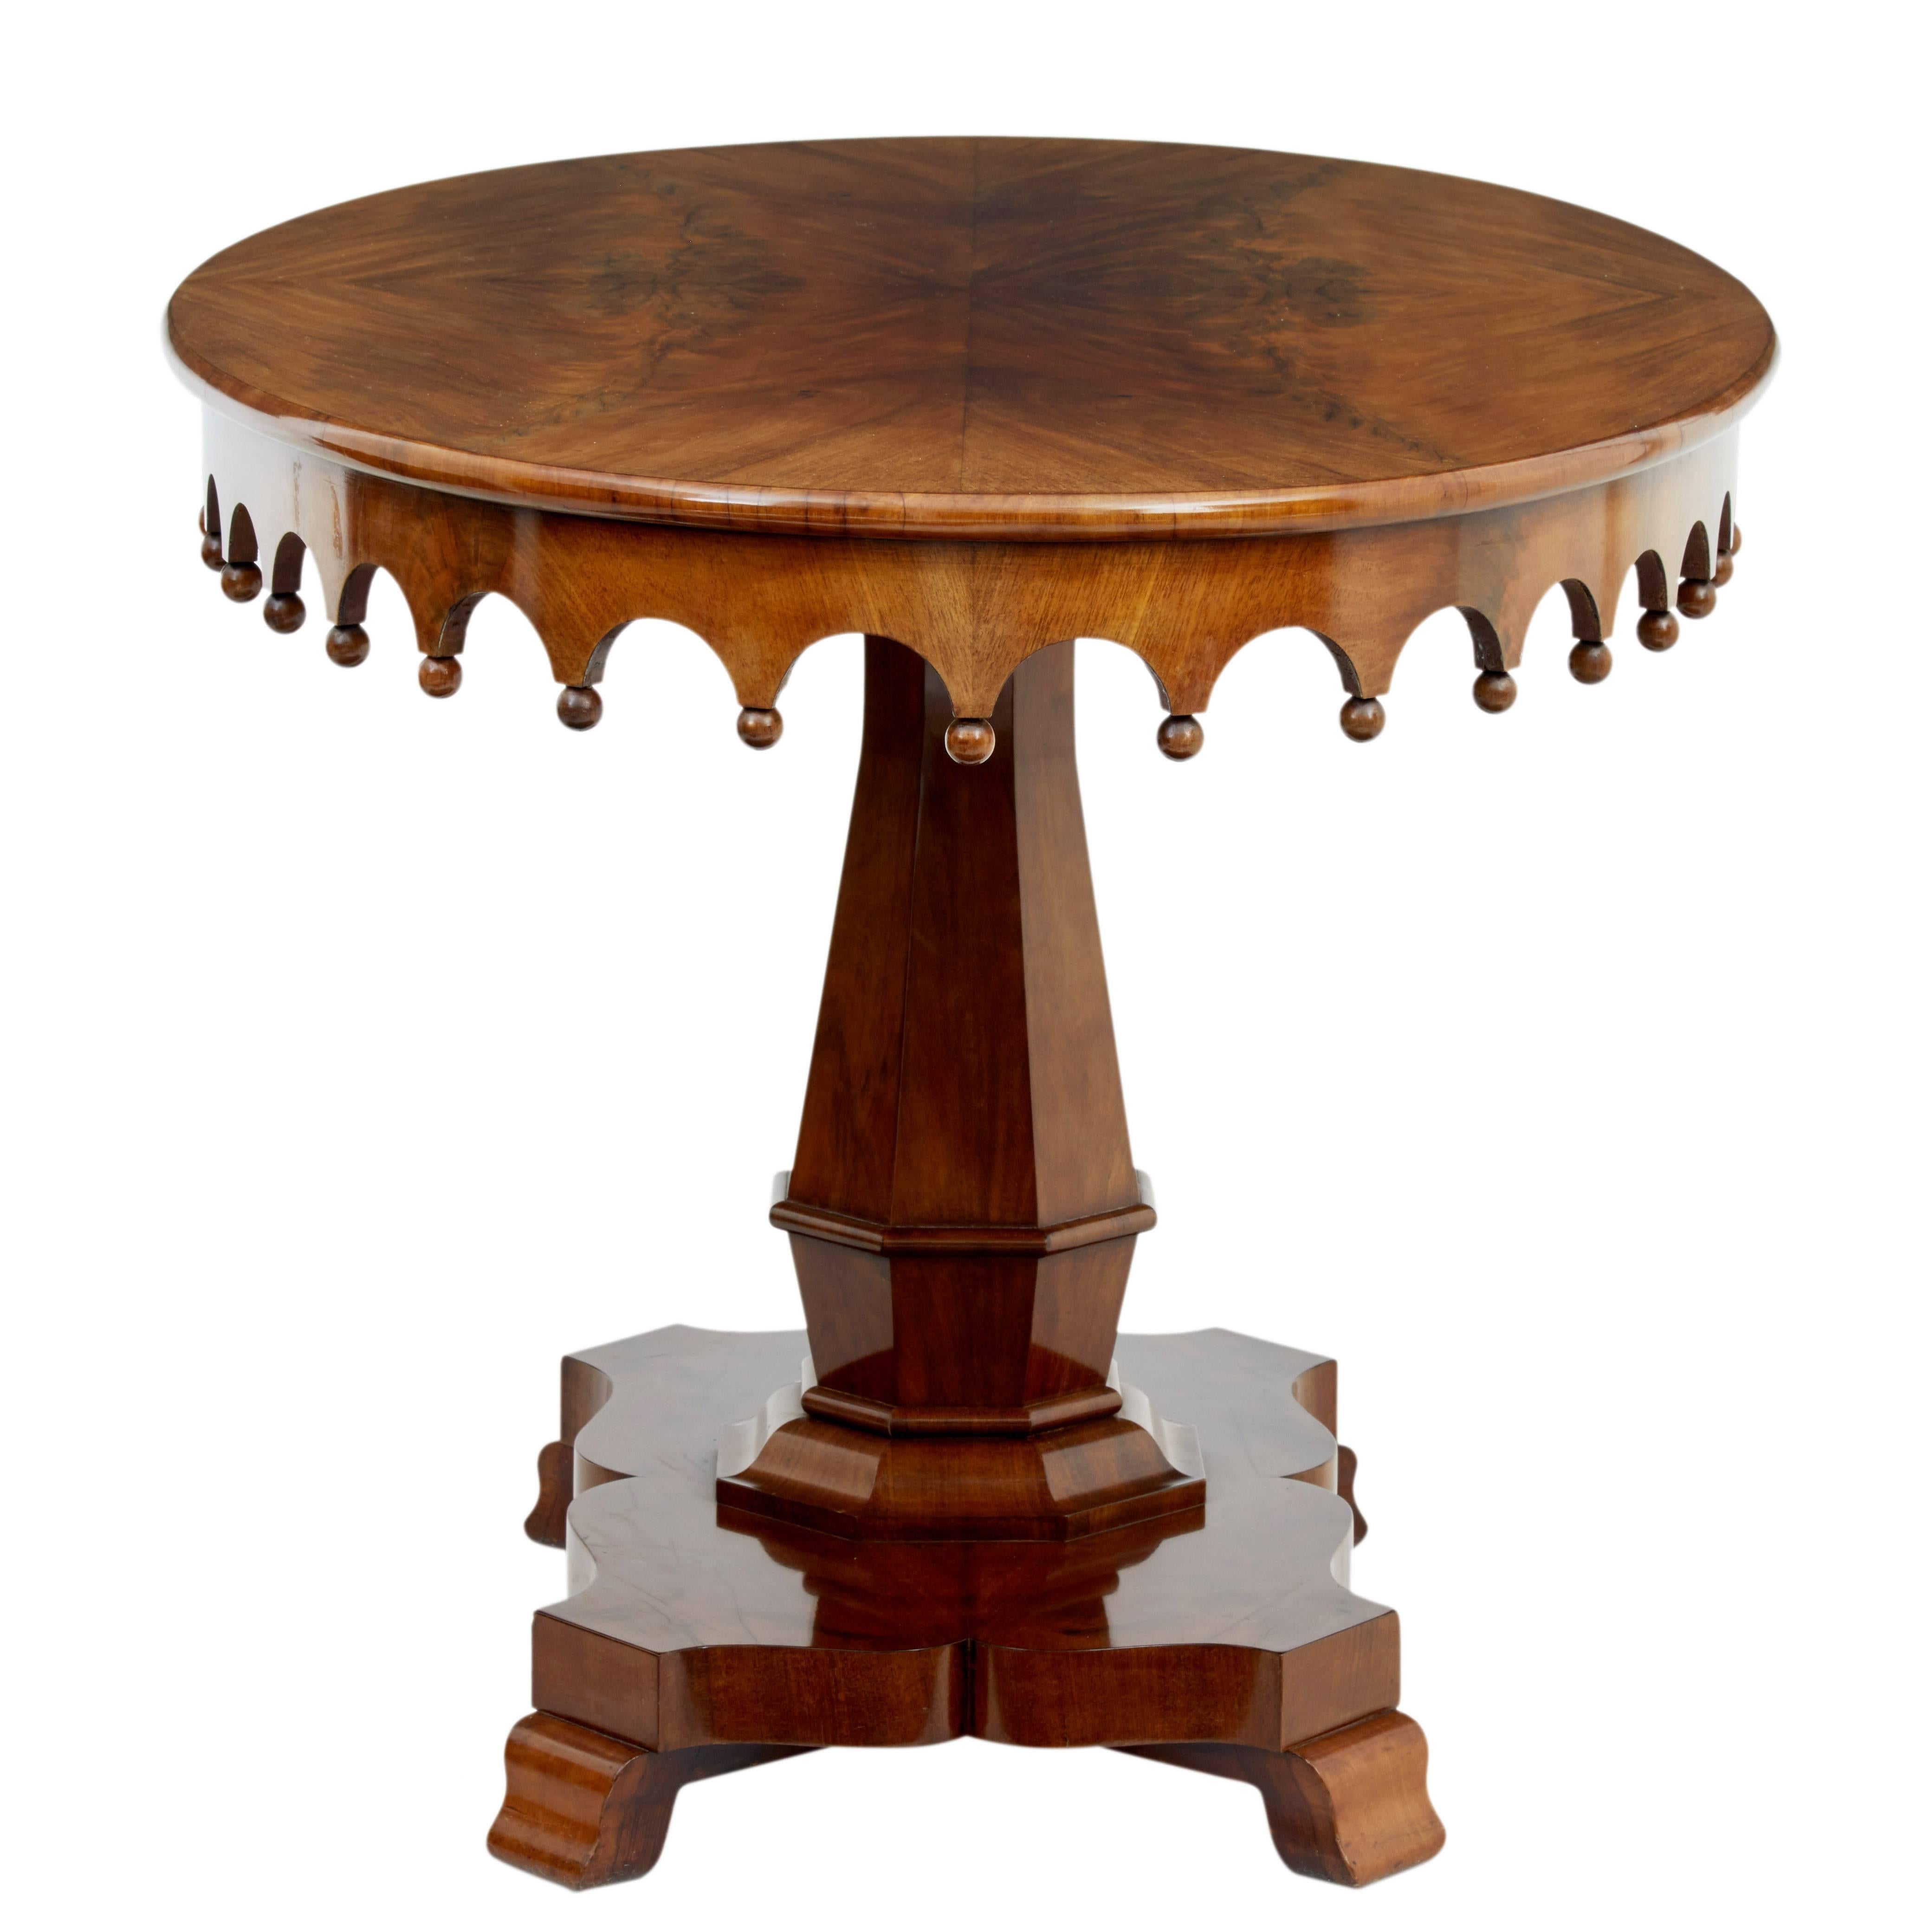 Fine quality danish mahogany center table circa 1870.
Oval top with quartered matching veneers.  Shaped apron with circular drops.
Octagonal fluted stem, standing on quadriform base.
Good color and patina.

Height: 29 1/2